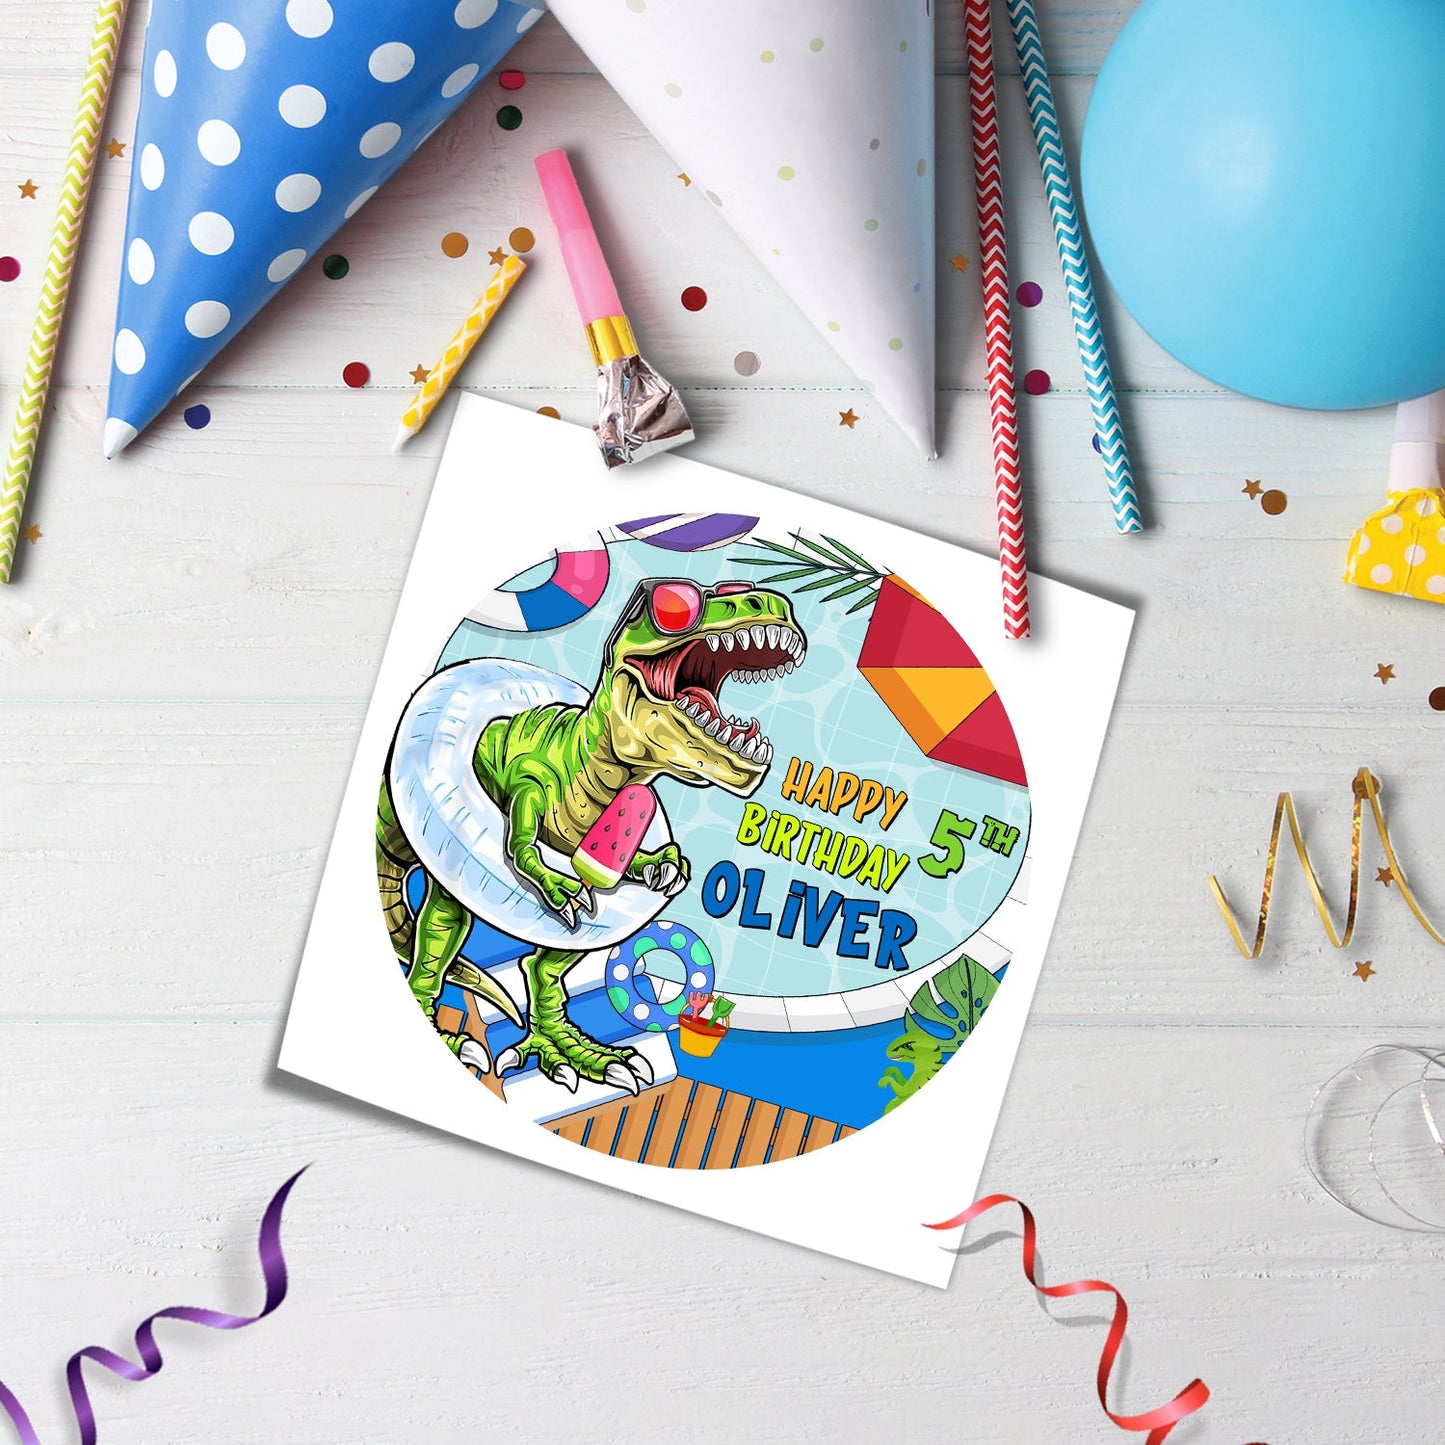 Round Dinosaur Edible Image Cake Topper - Personalized for Your Party